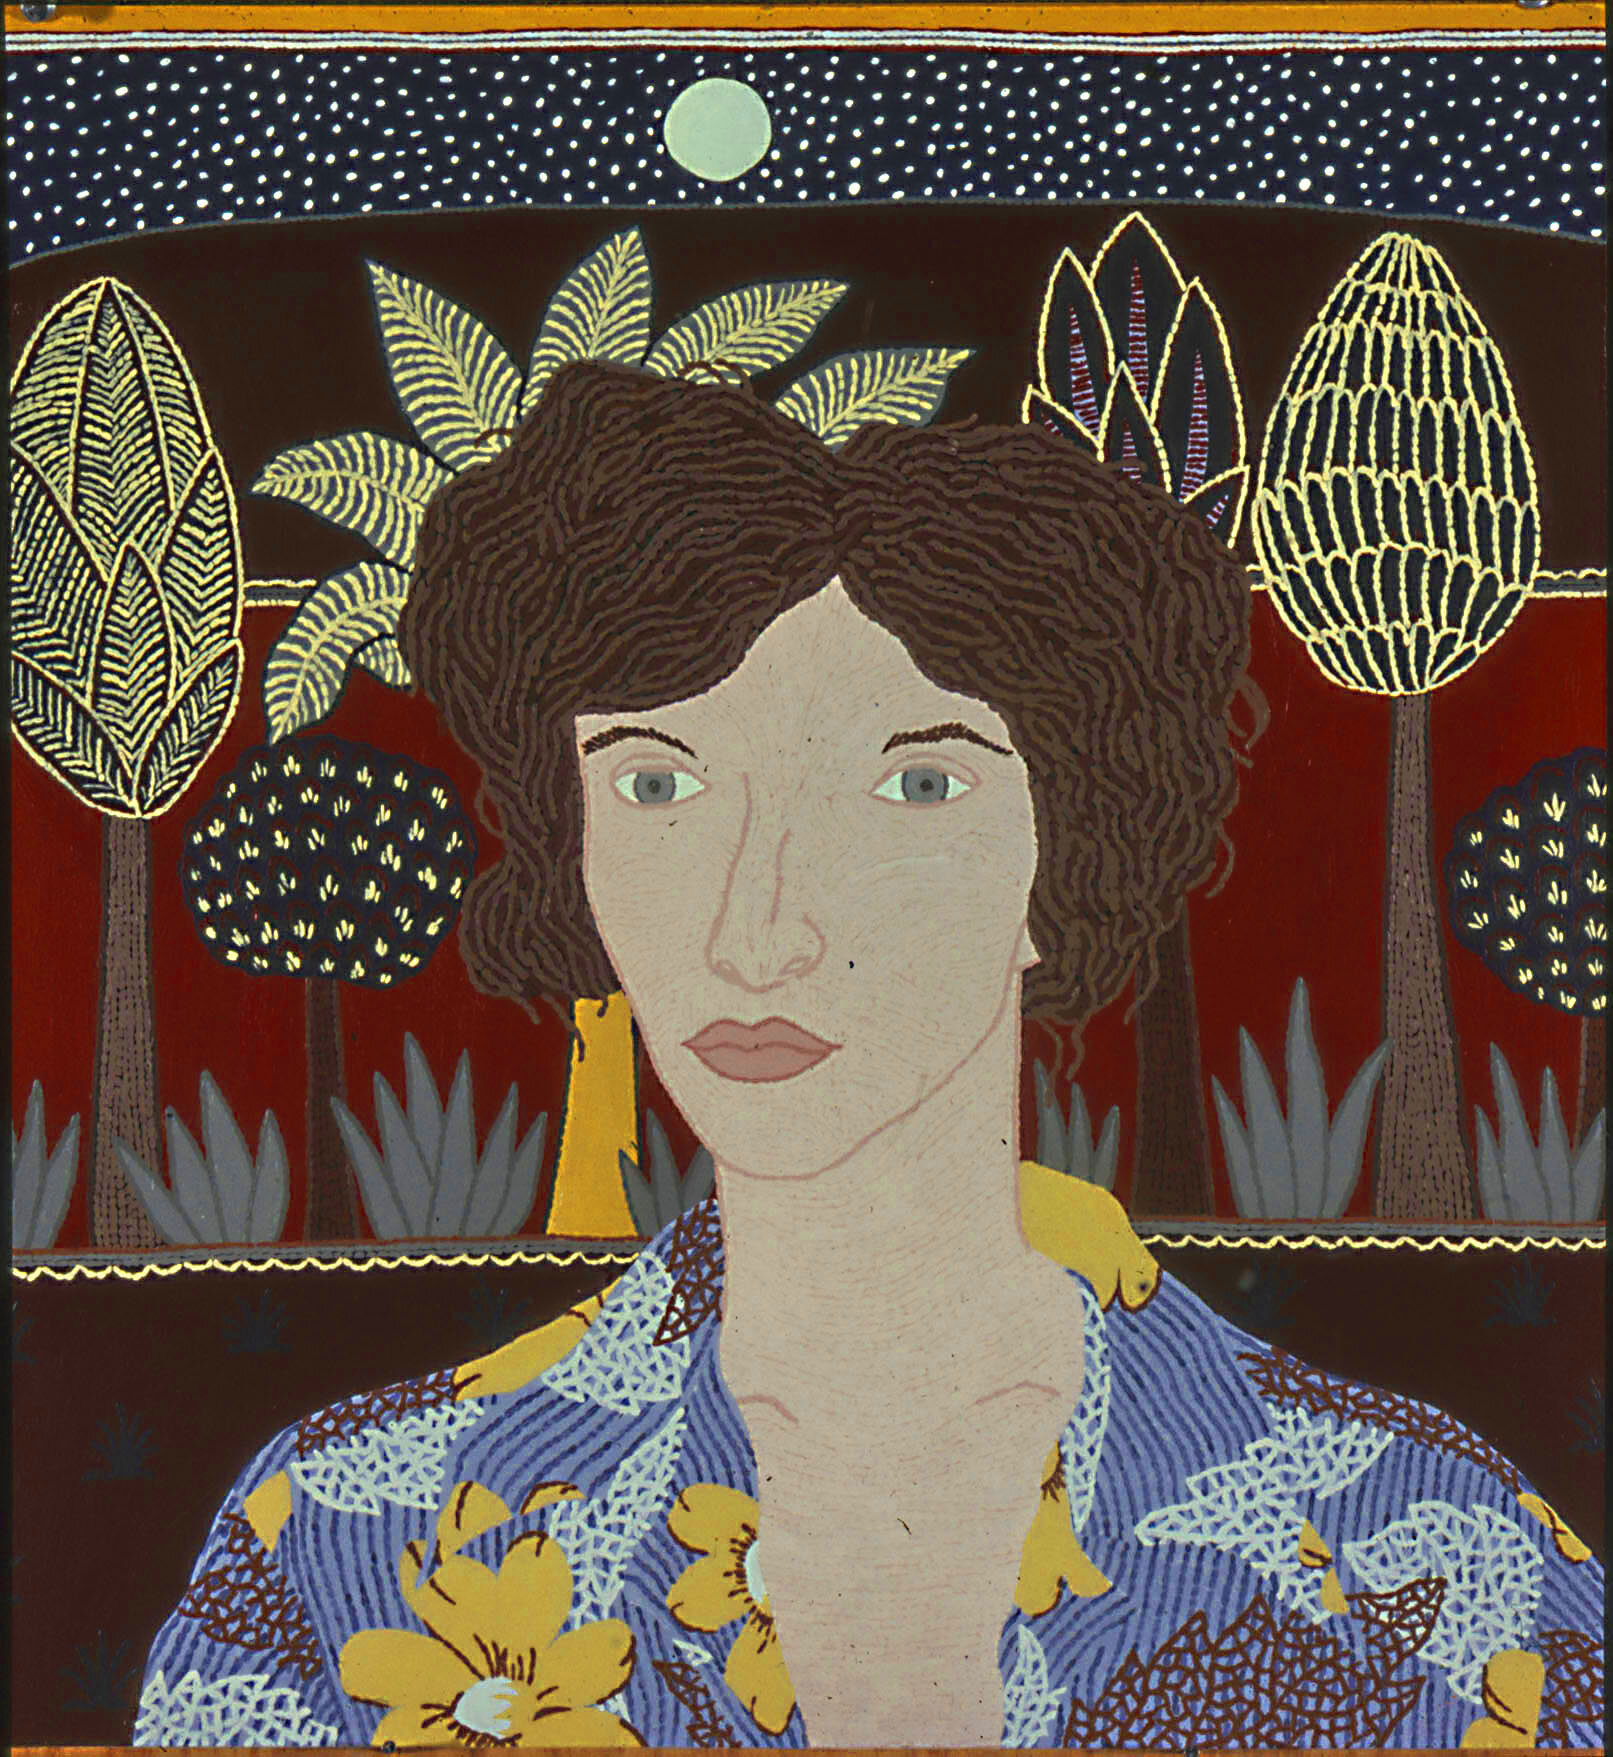   Self-Portrait , 1975, acrylic on watercolor board, 19 1/2 x 18 inches.  Collection Crocker Art Museum.  